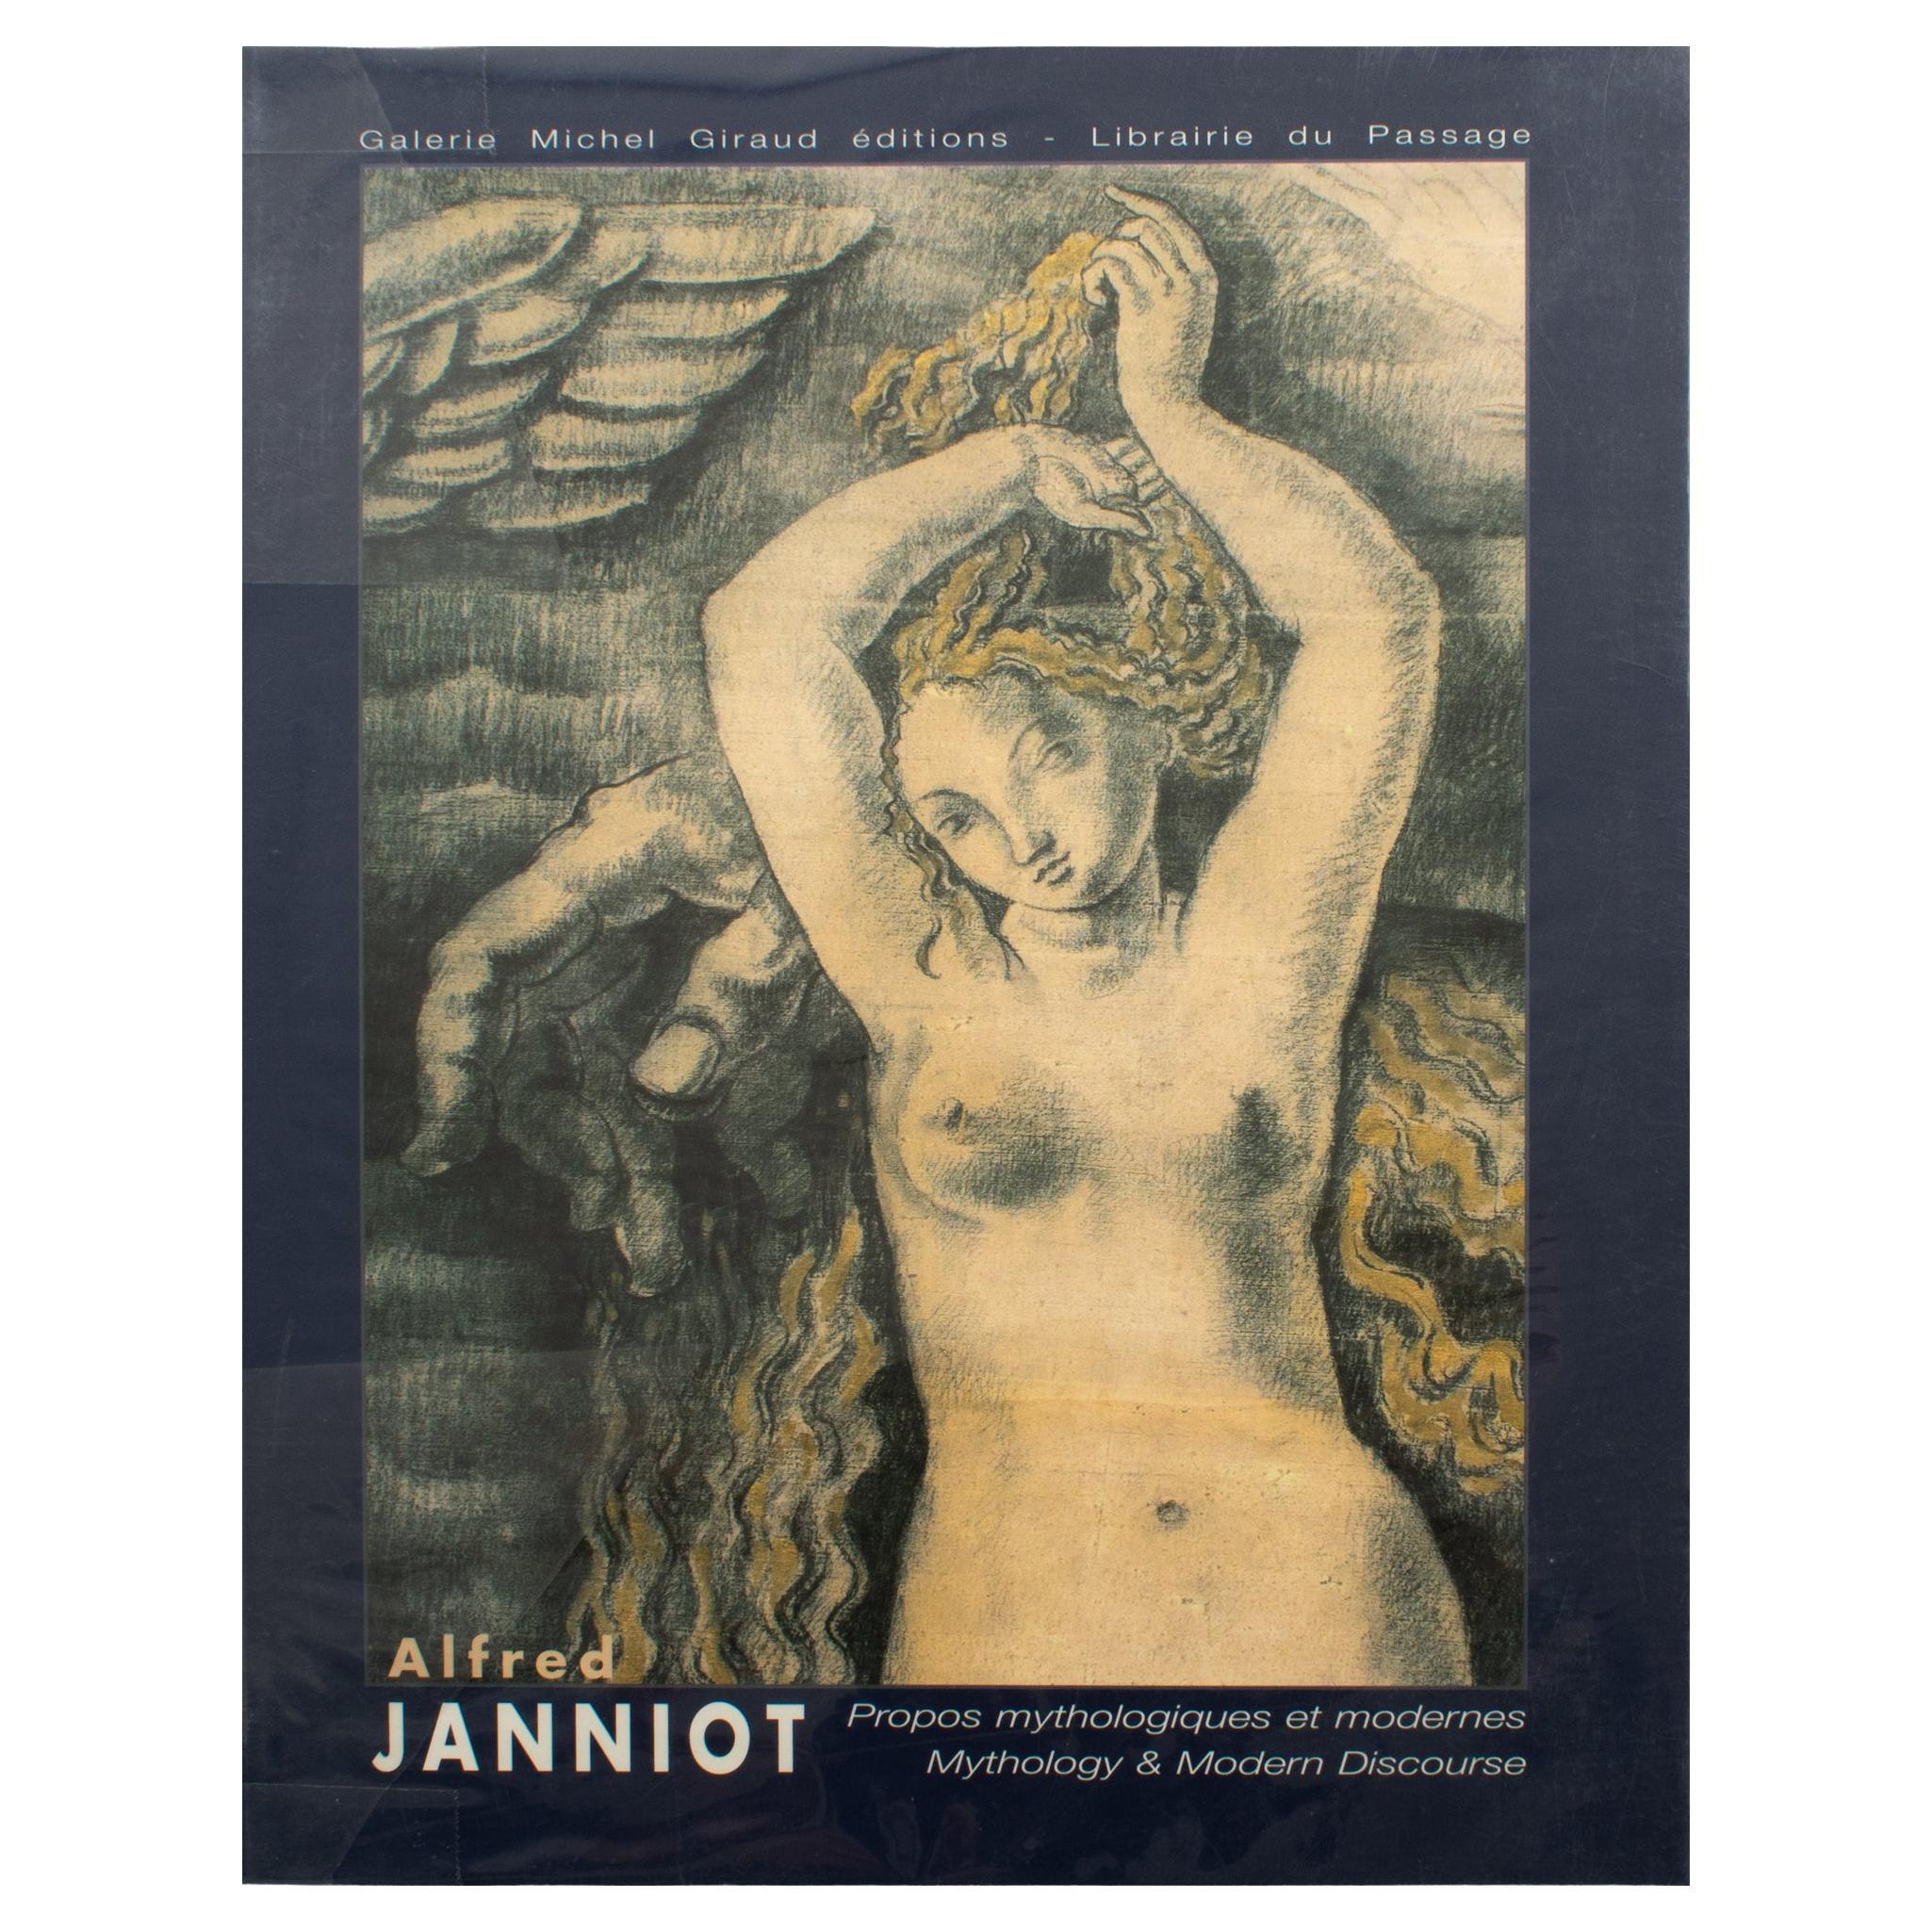 Alfred Janniot, Mythology and Modern Discourse, French-English Book by M. Giraud For Sale